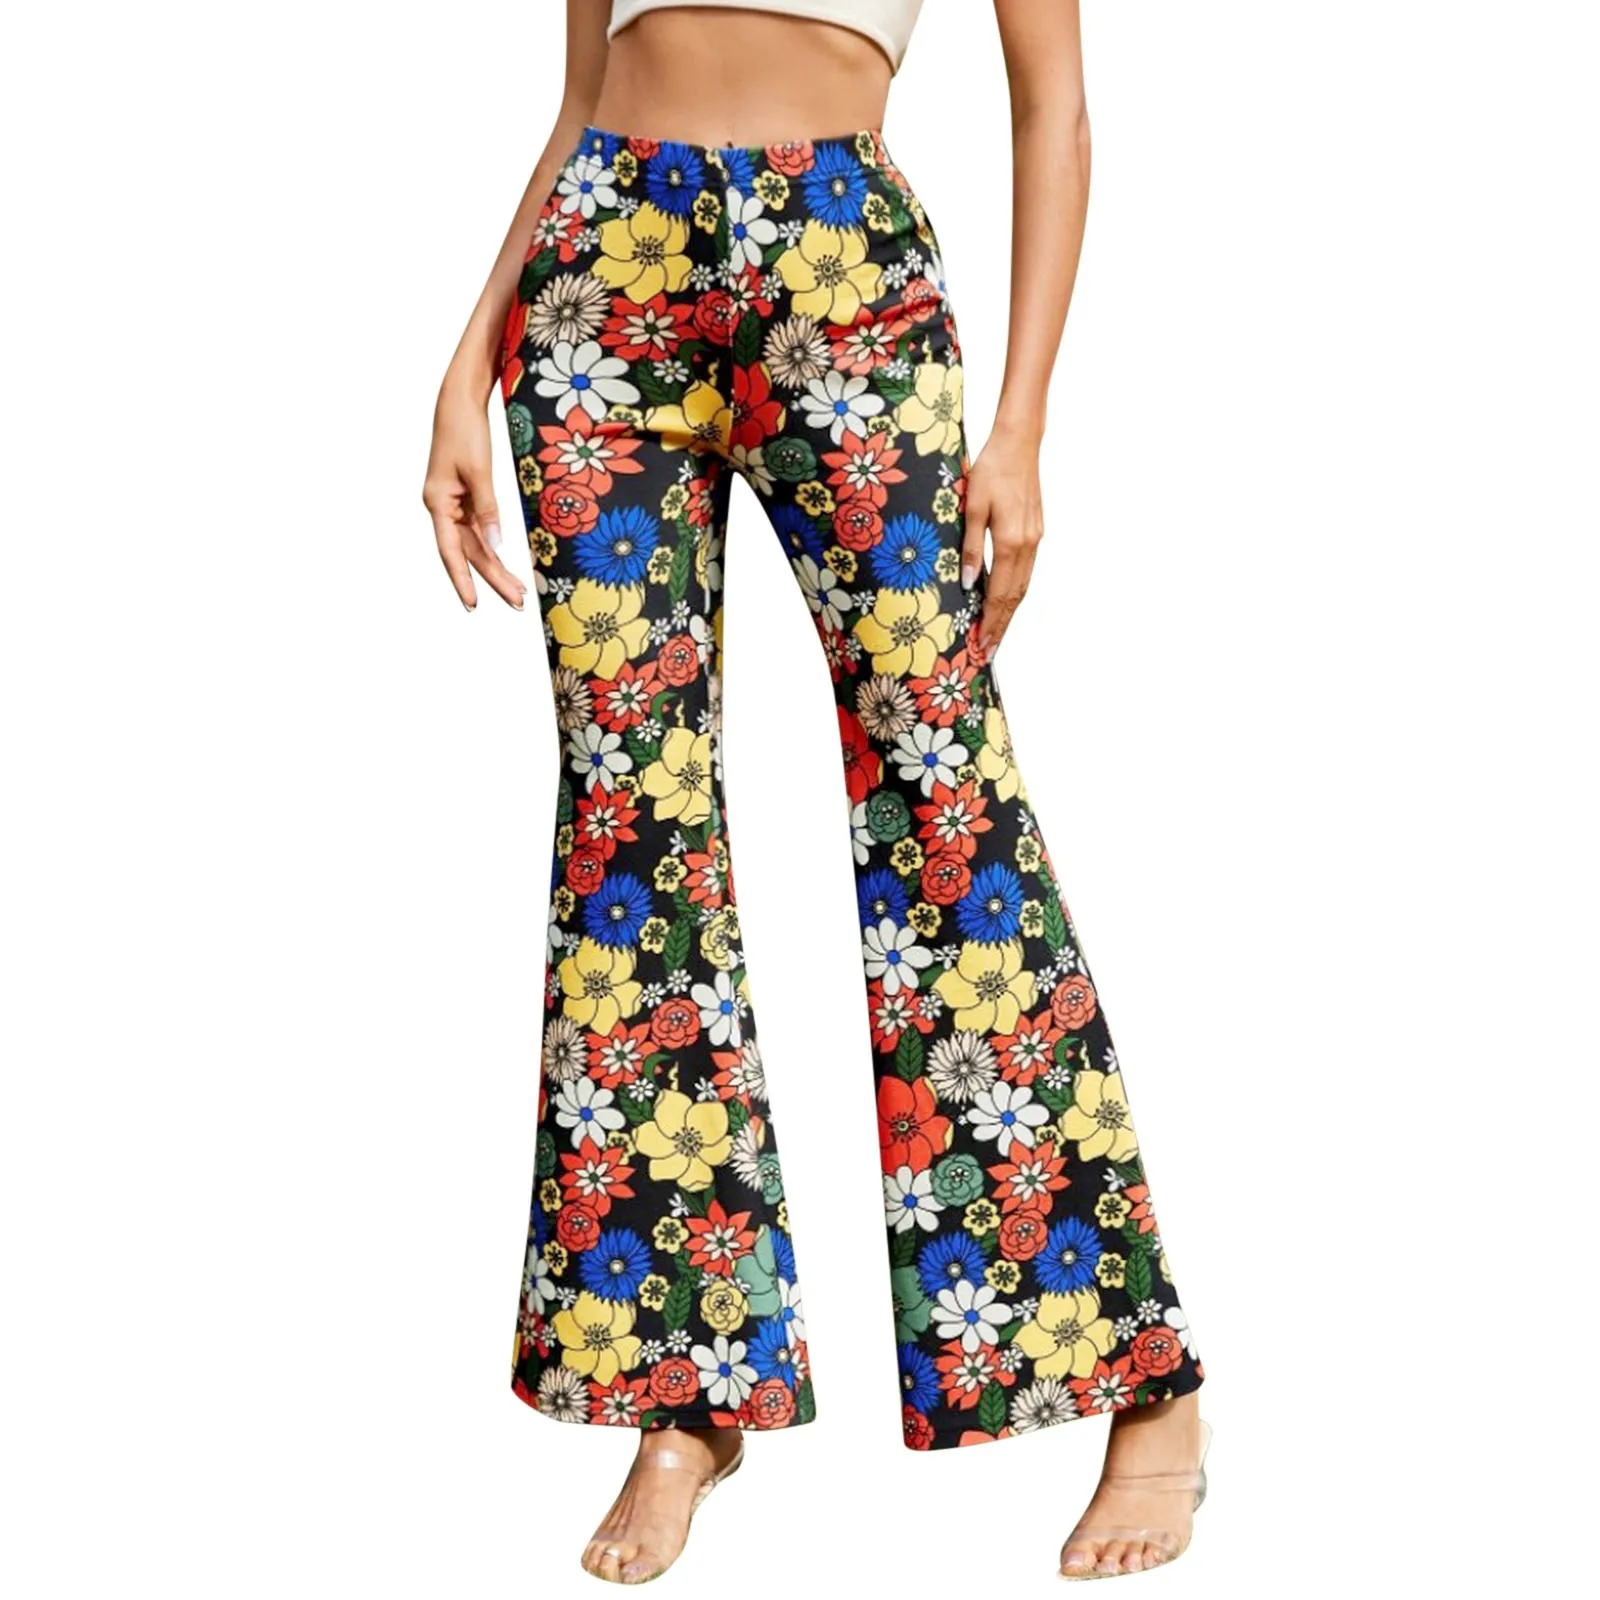 Women's Plus Size Floral Print Flared Sweatpants - Casual Sports Trousers